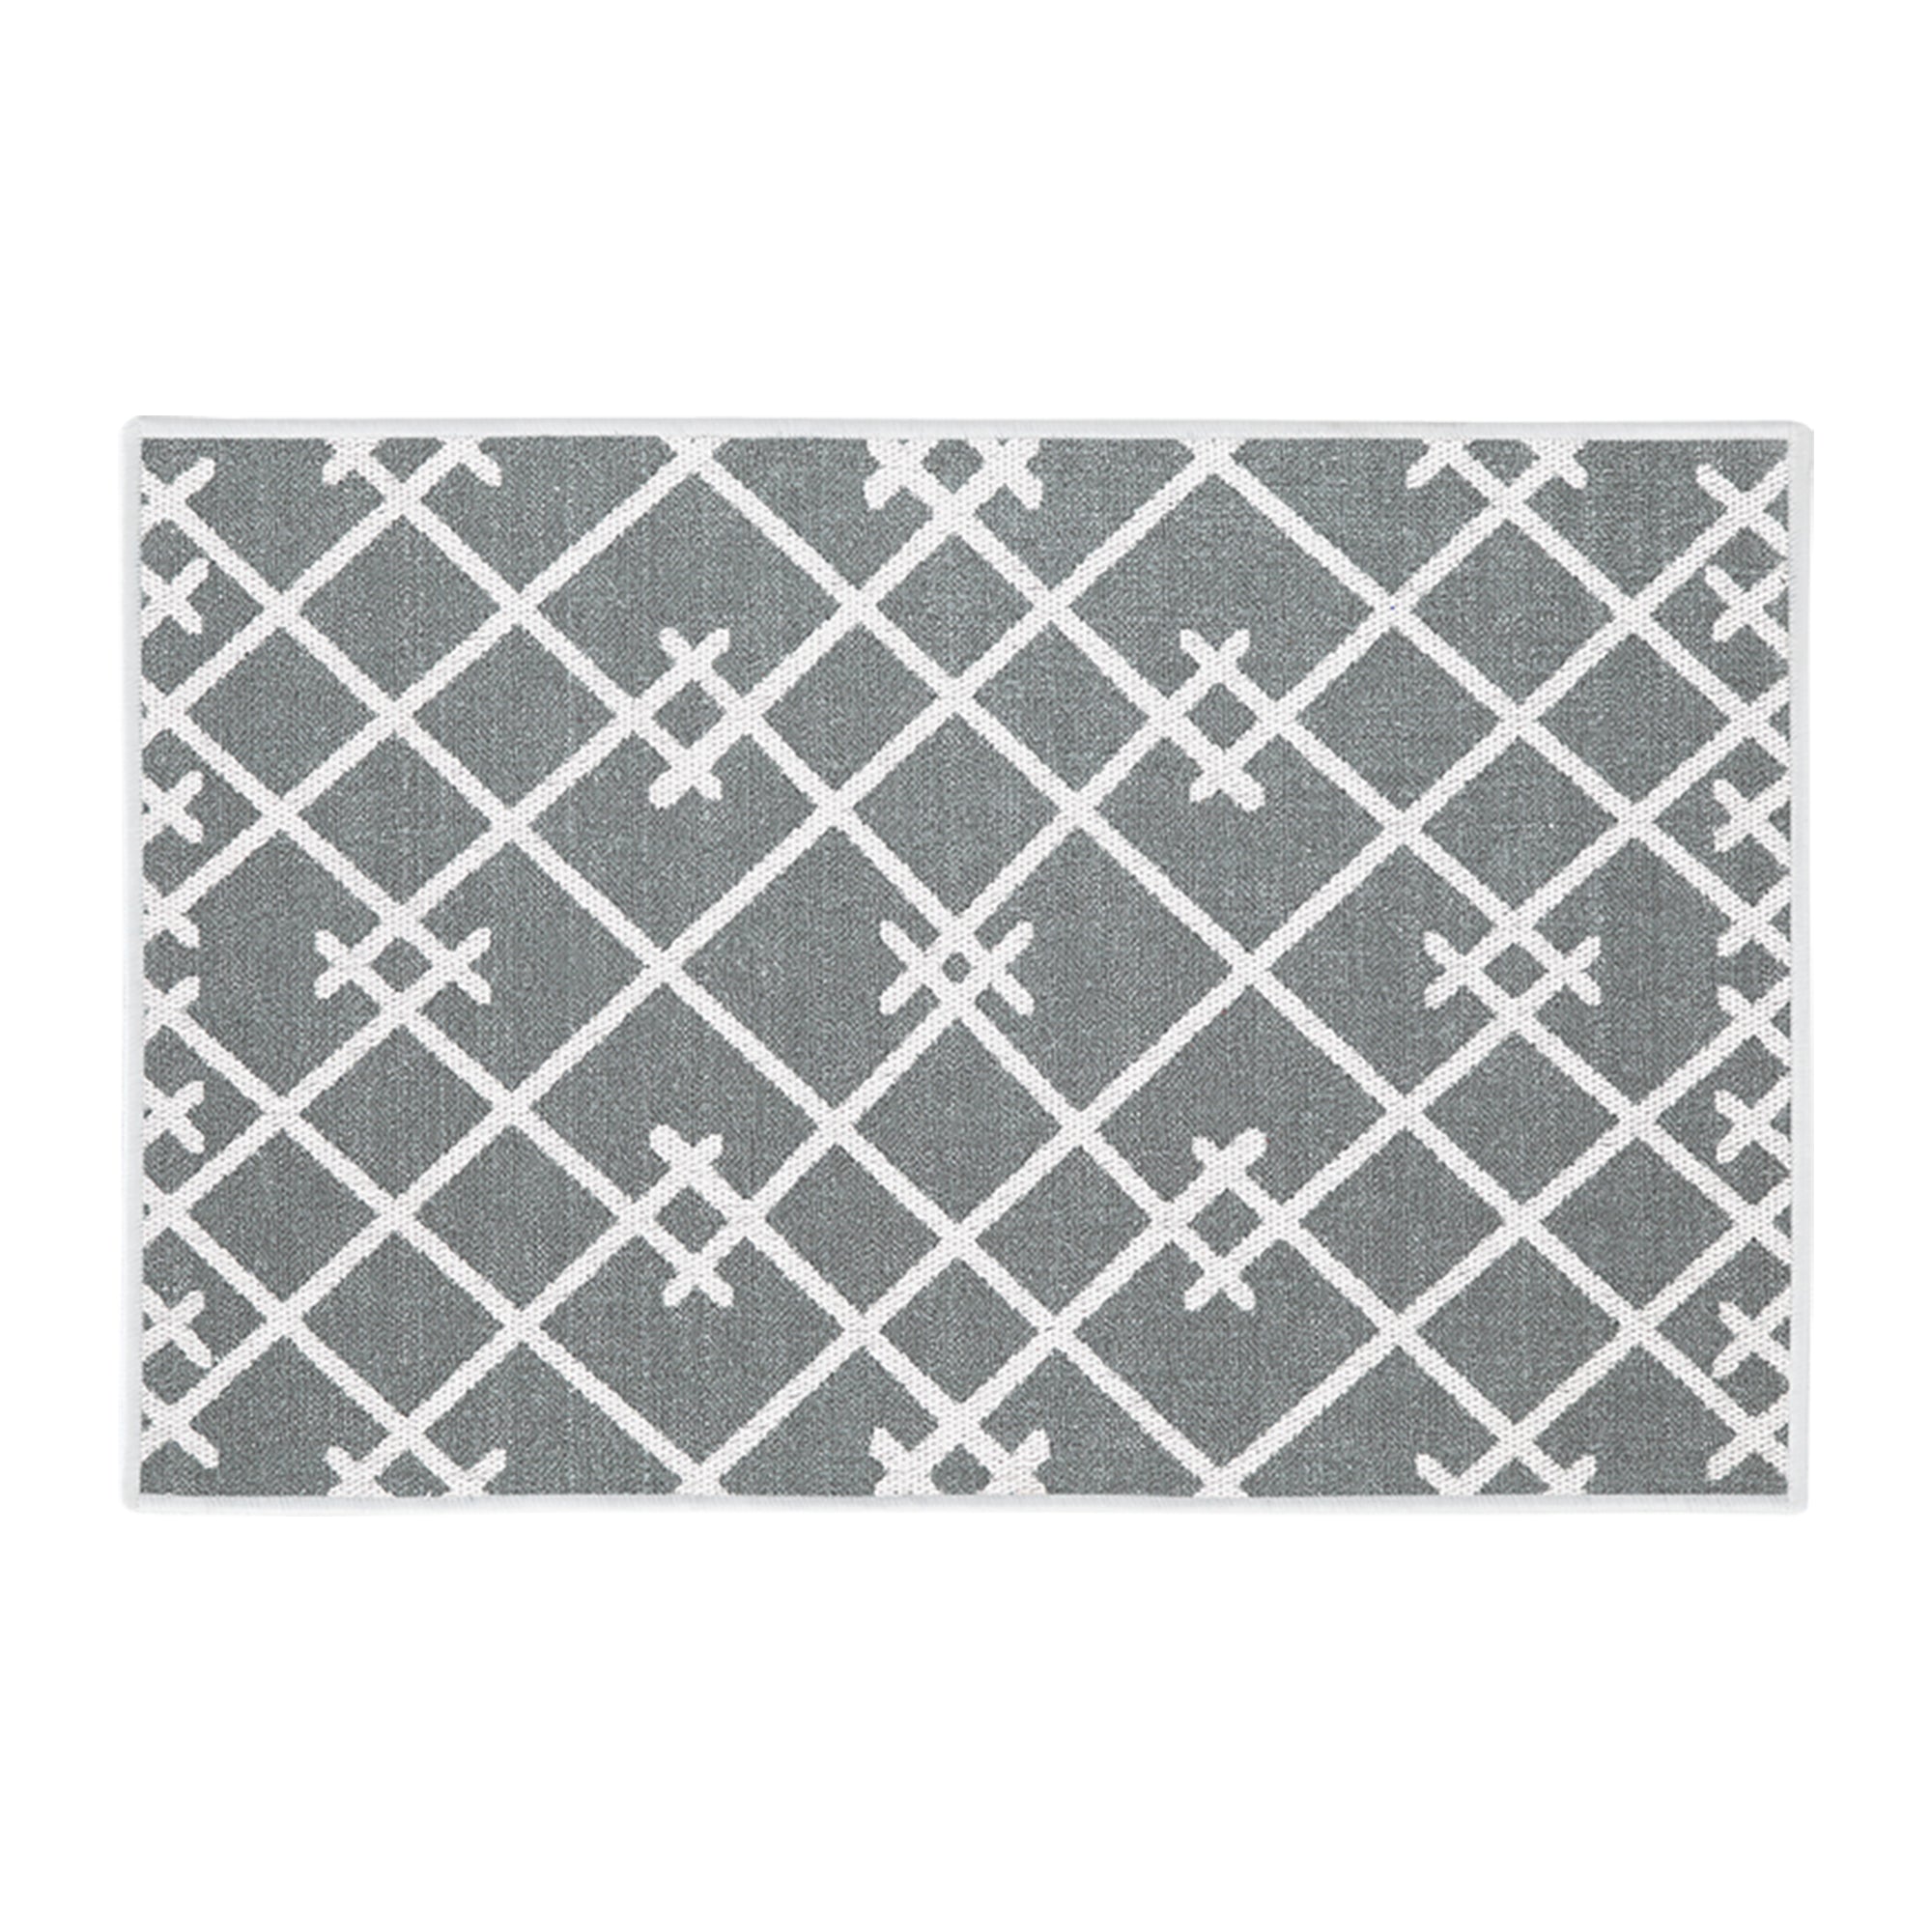 Sussexhome Non-Skid Thin Area Rugs for Laundry Room, Entryway, Bathroom and Kitchen - 20 x 31 Inches Floor Mat - Geometric-Gray2